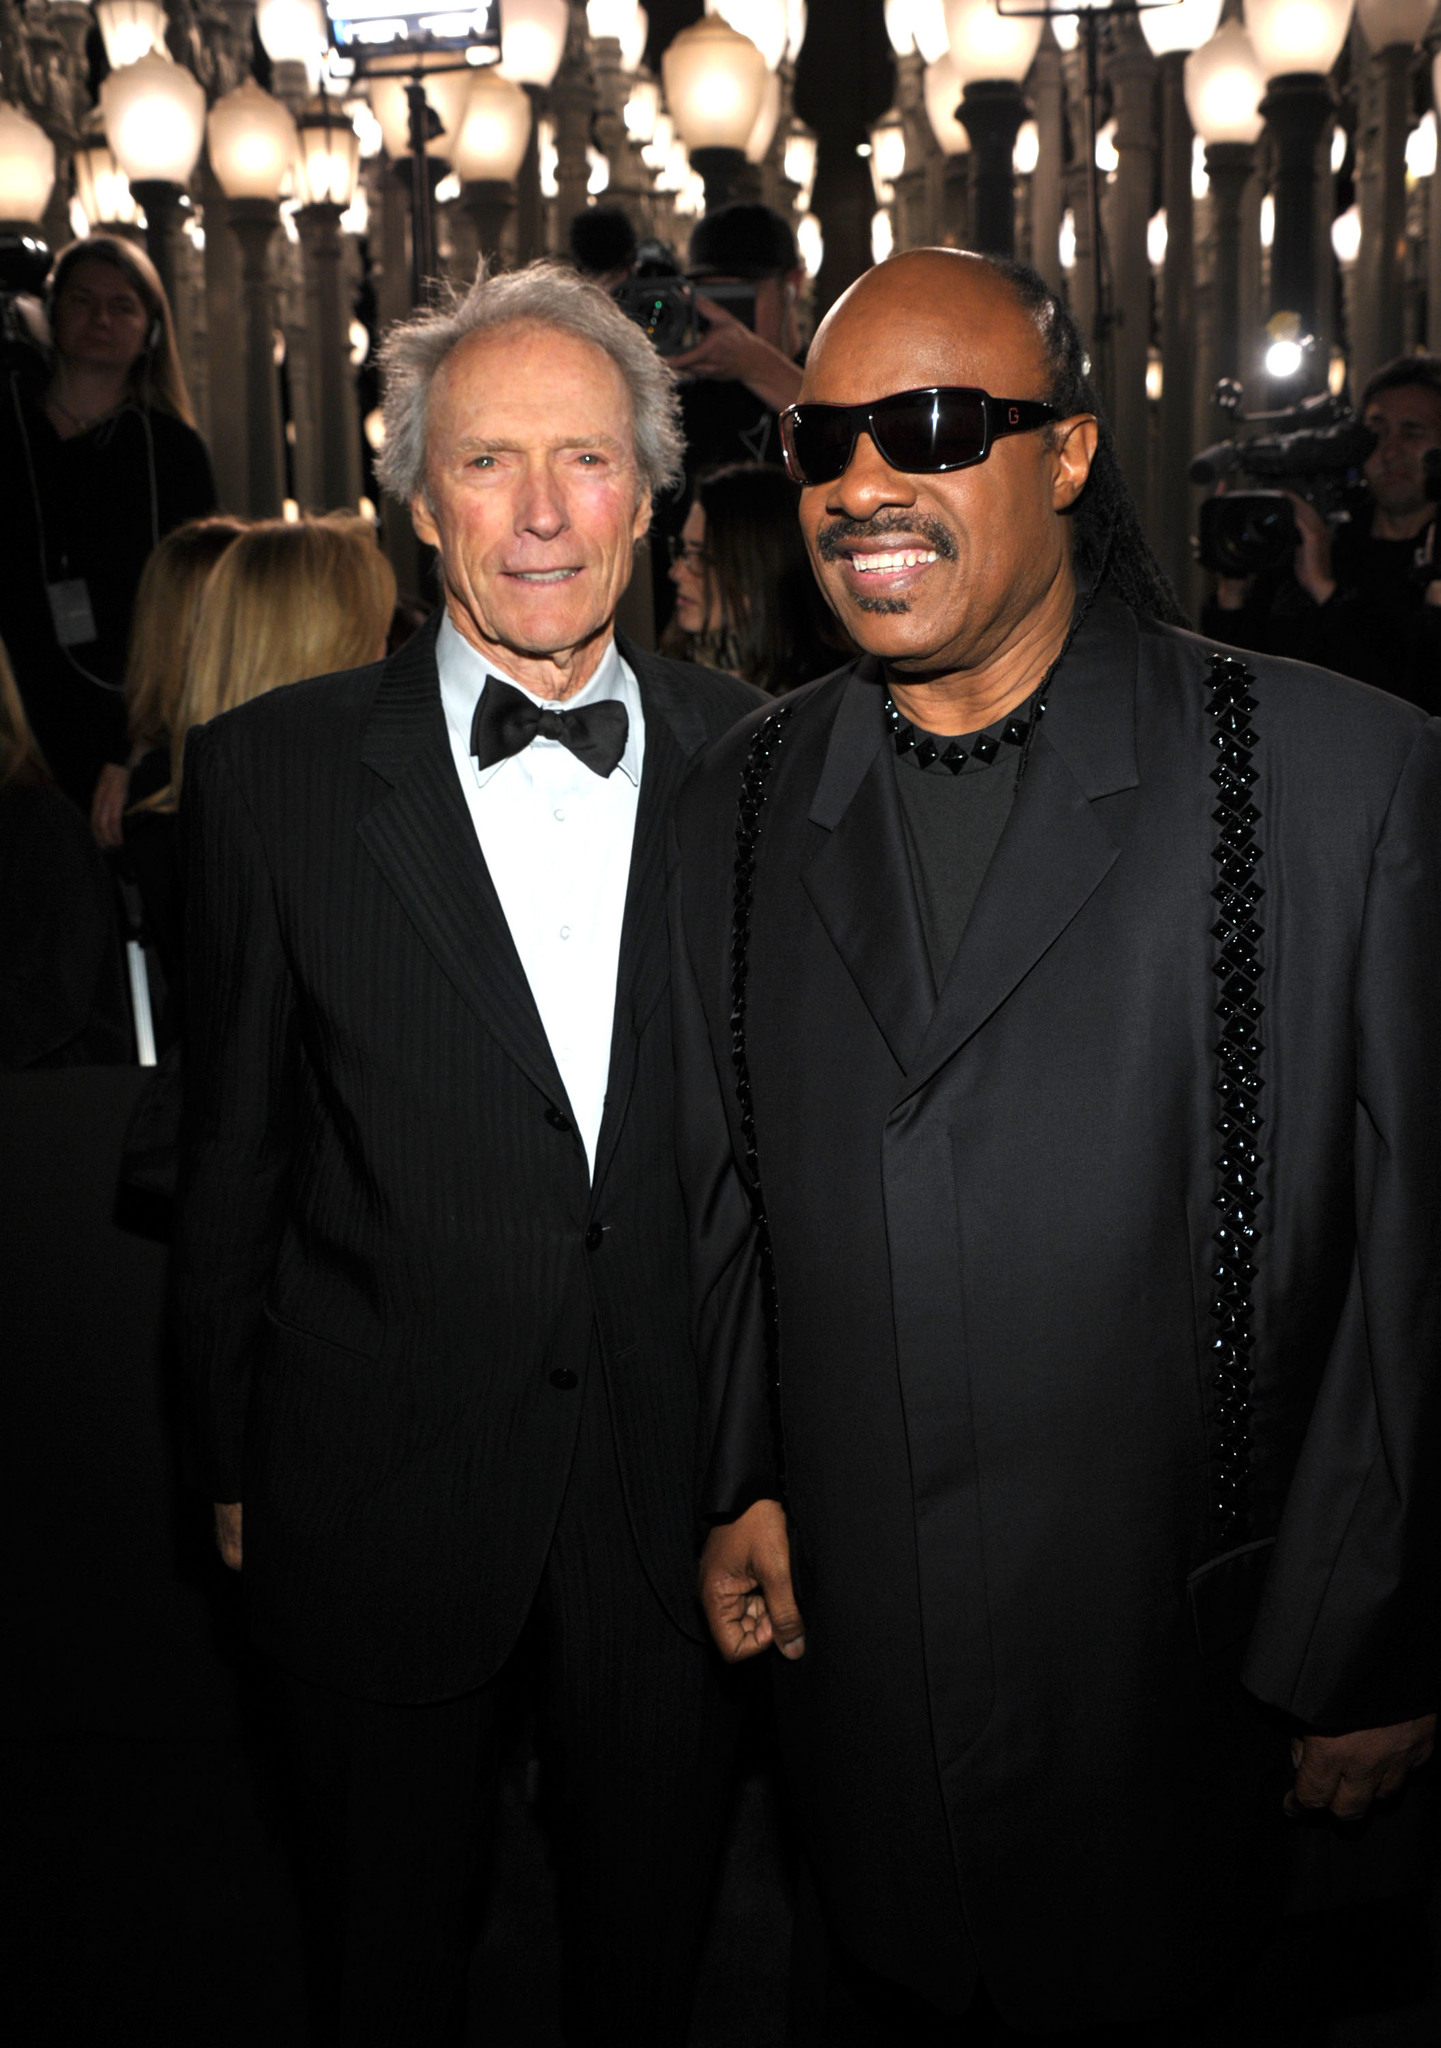 Clint Eastwood and Stevie Wonder